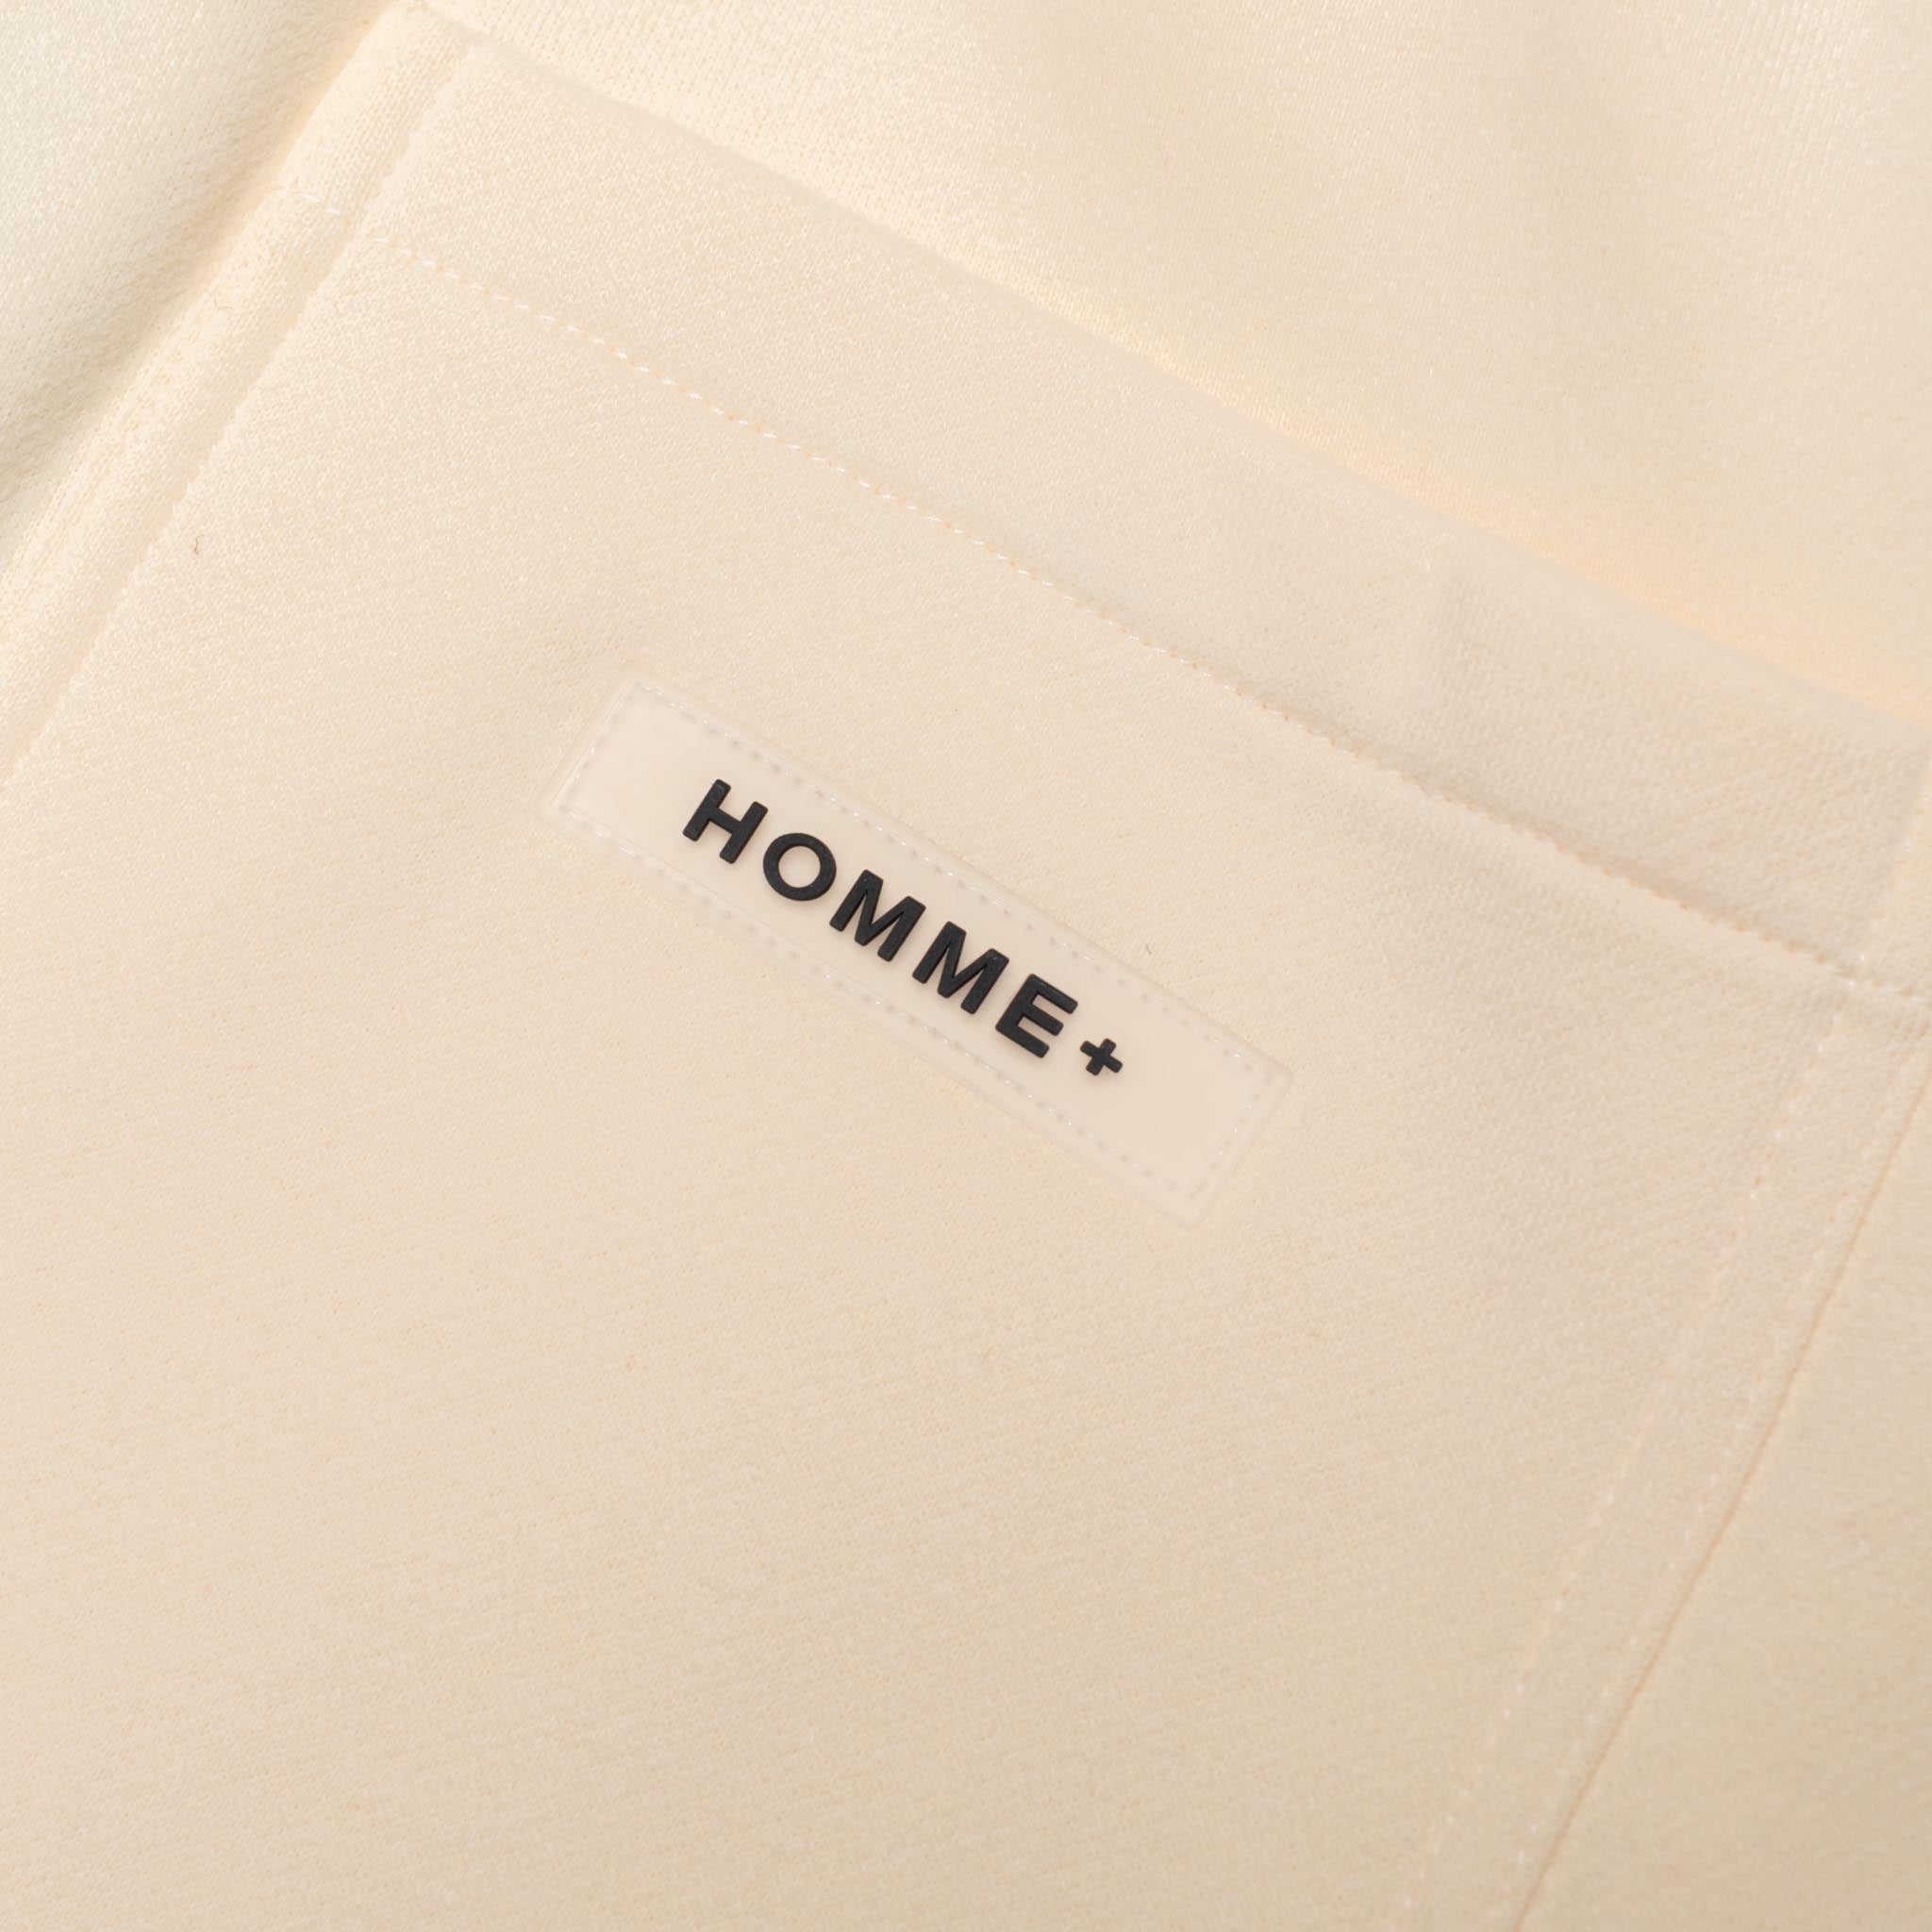 HOMME+ ESSENTIAL By Homme Jogger Off White